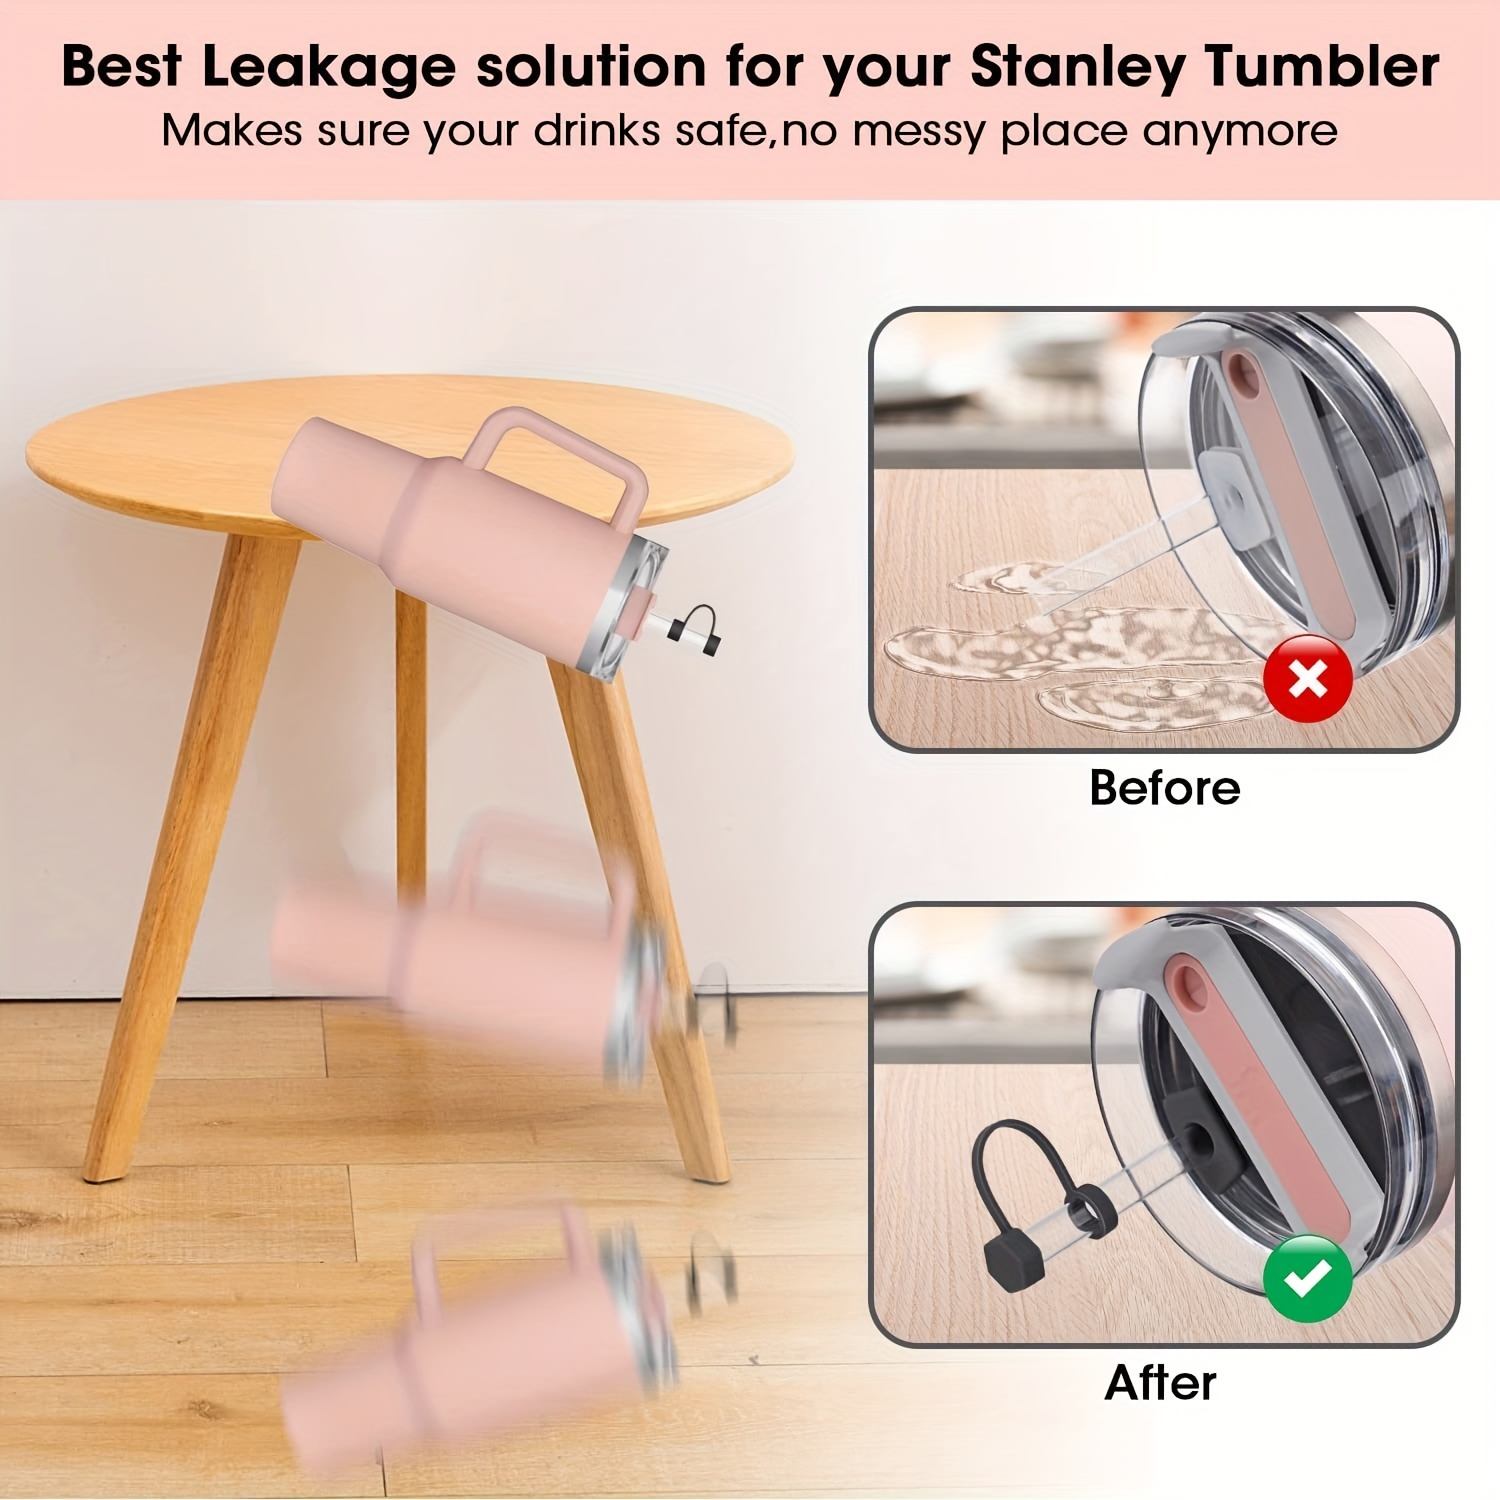 The Stahp & Go Spill-Proof Topper for Stanley Tumblers Is Genius